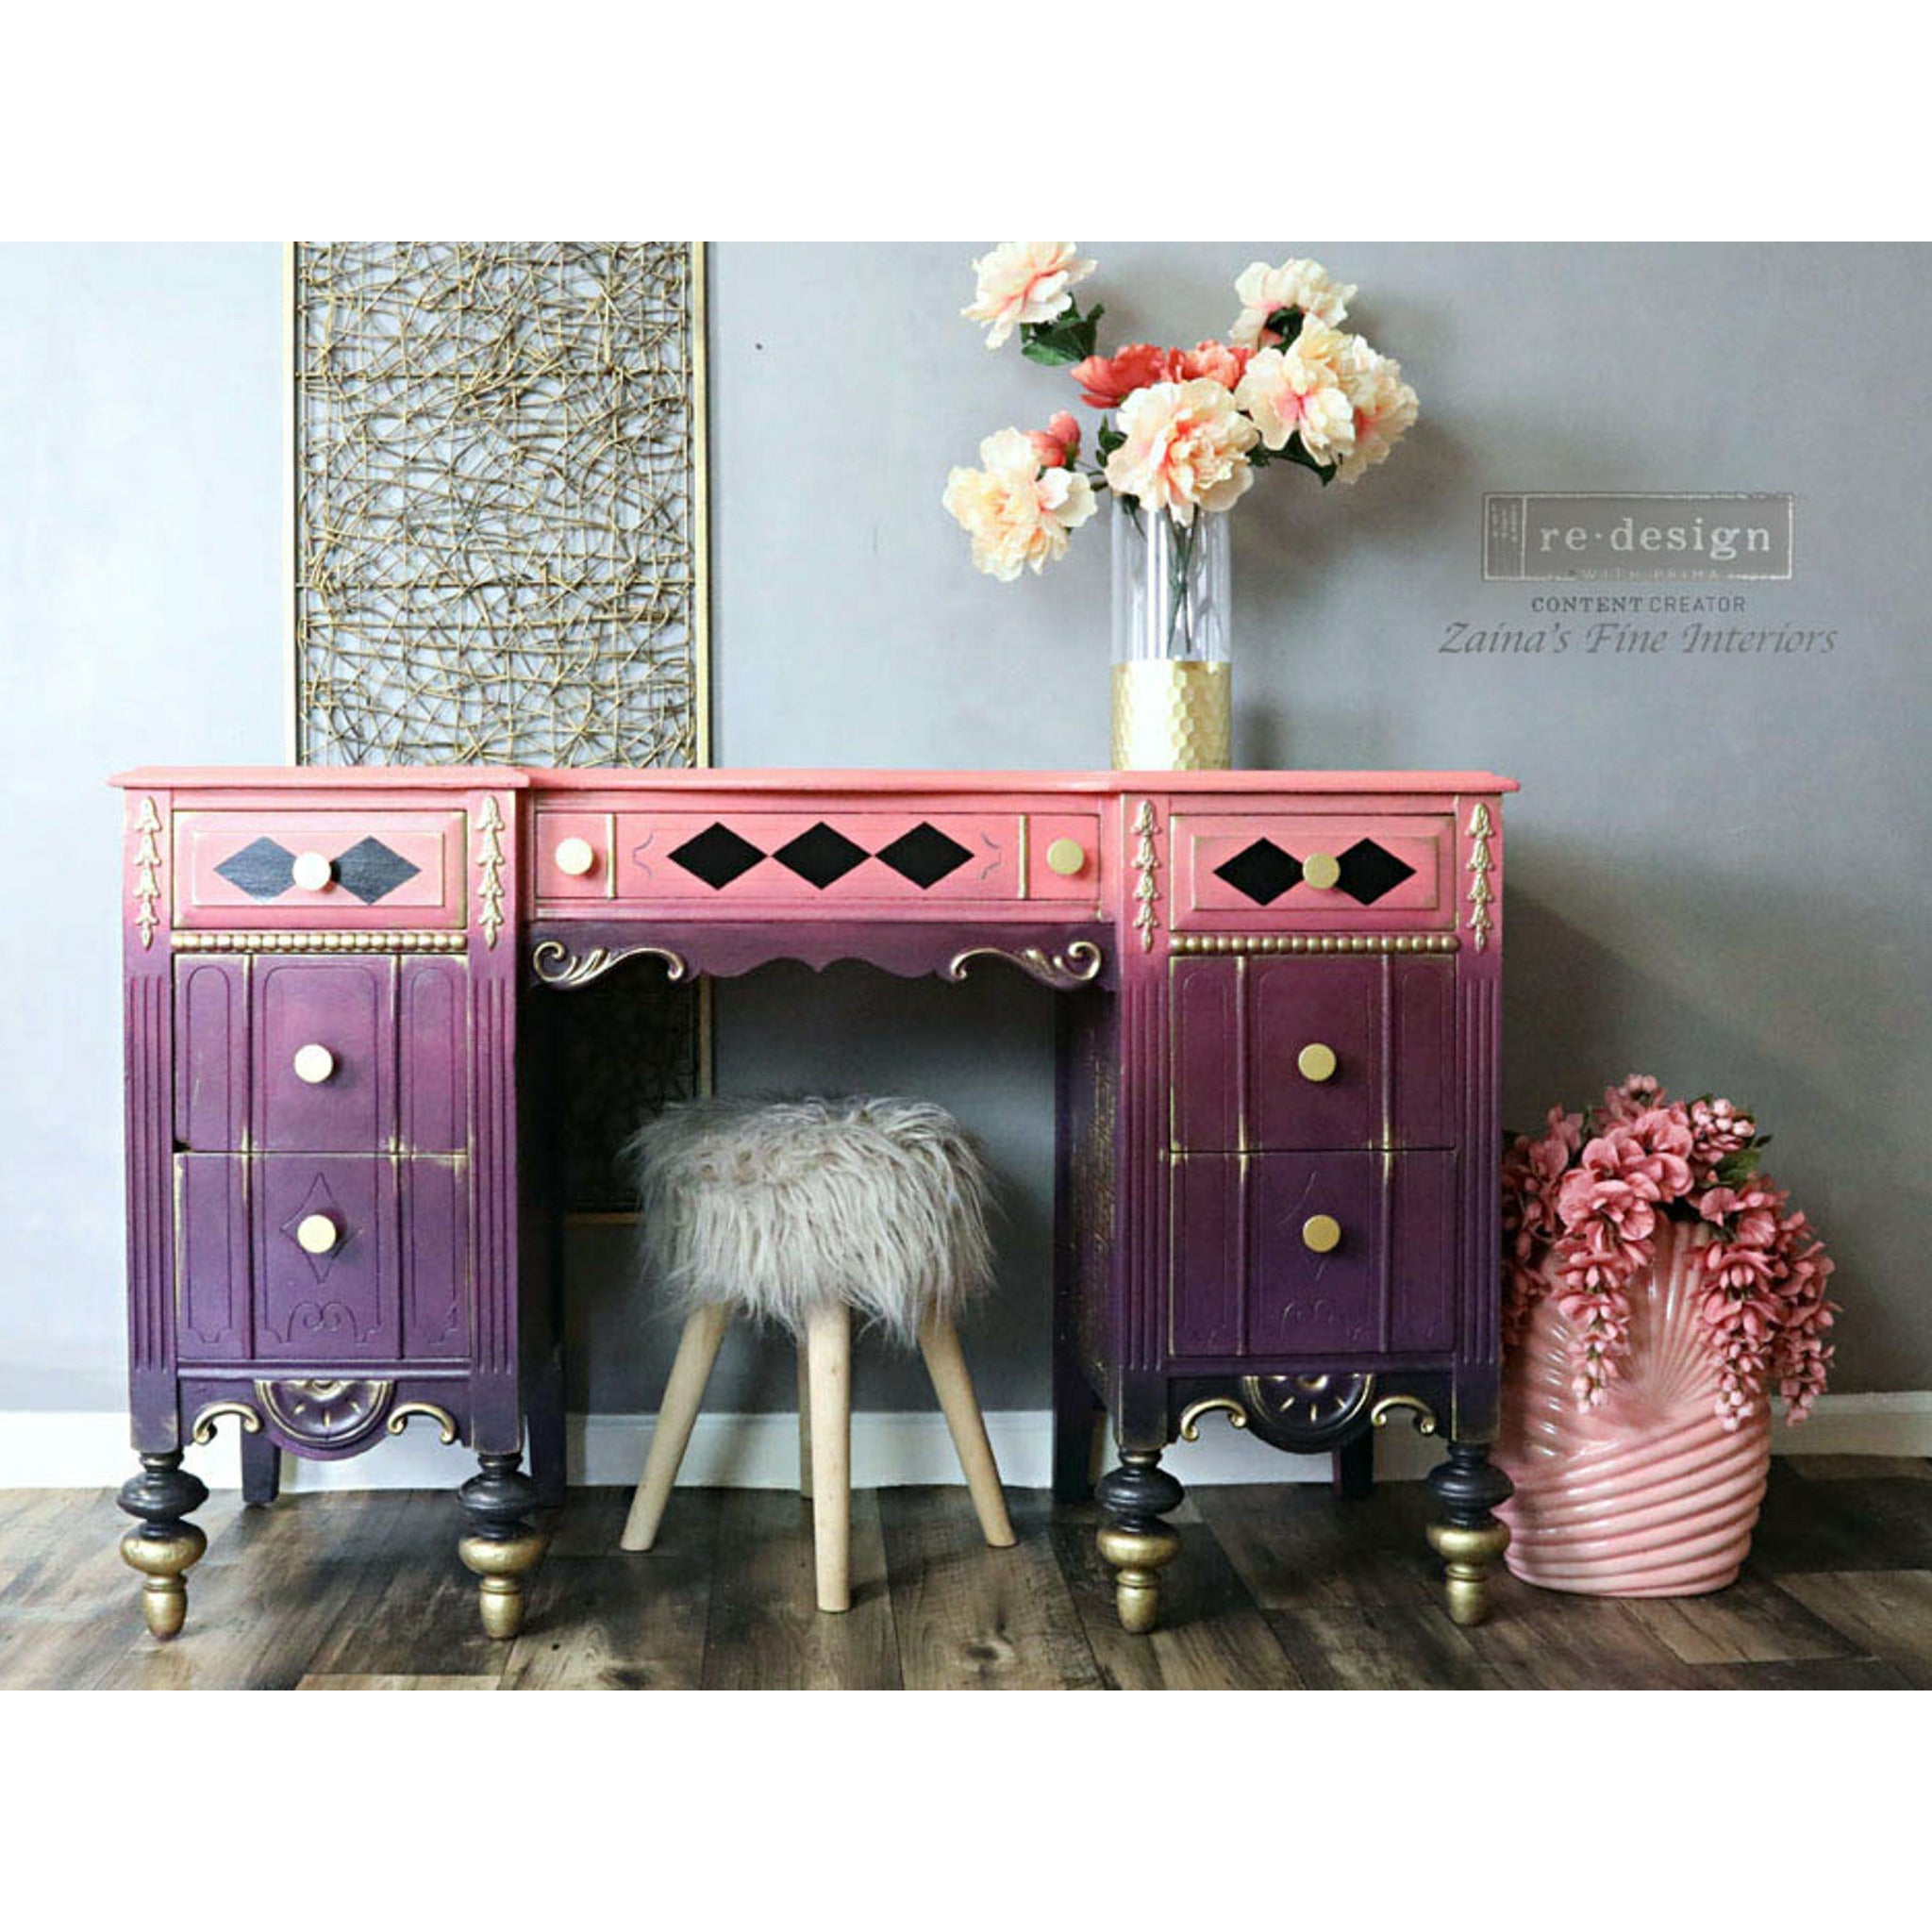 Purple and pink dresser with the Harlequin transfer on top. A Redesign content creator and Zainas Fine Interiors logo on the top right.